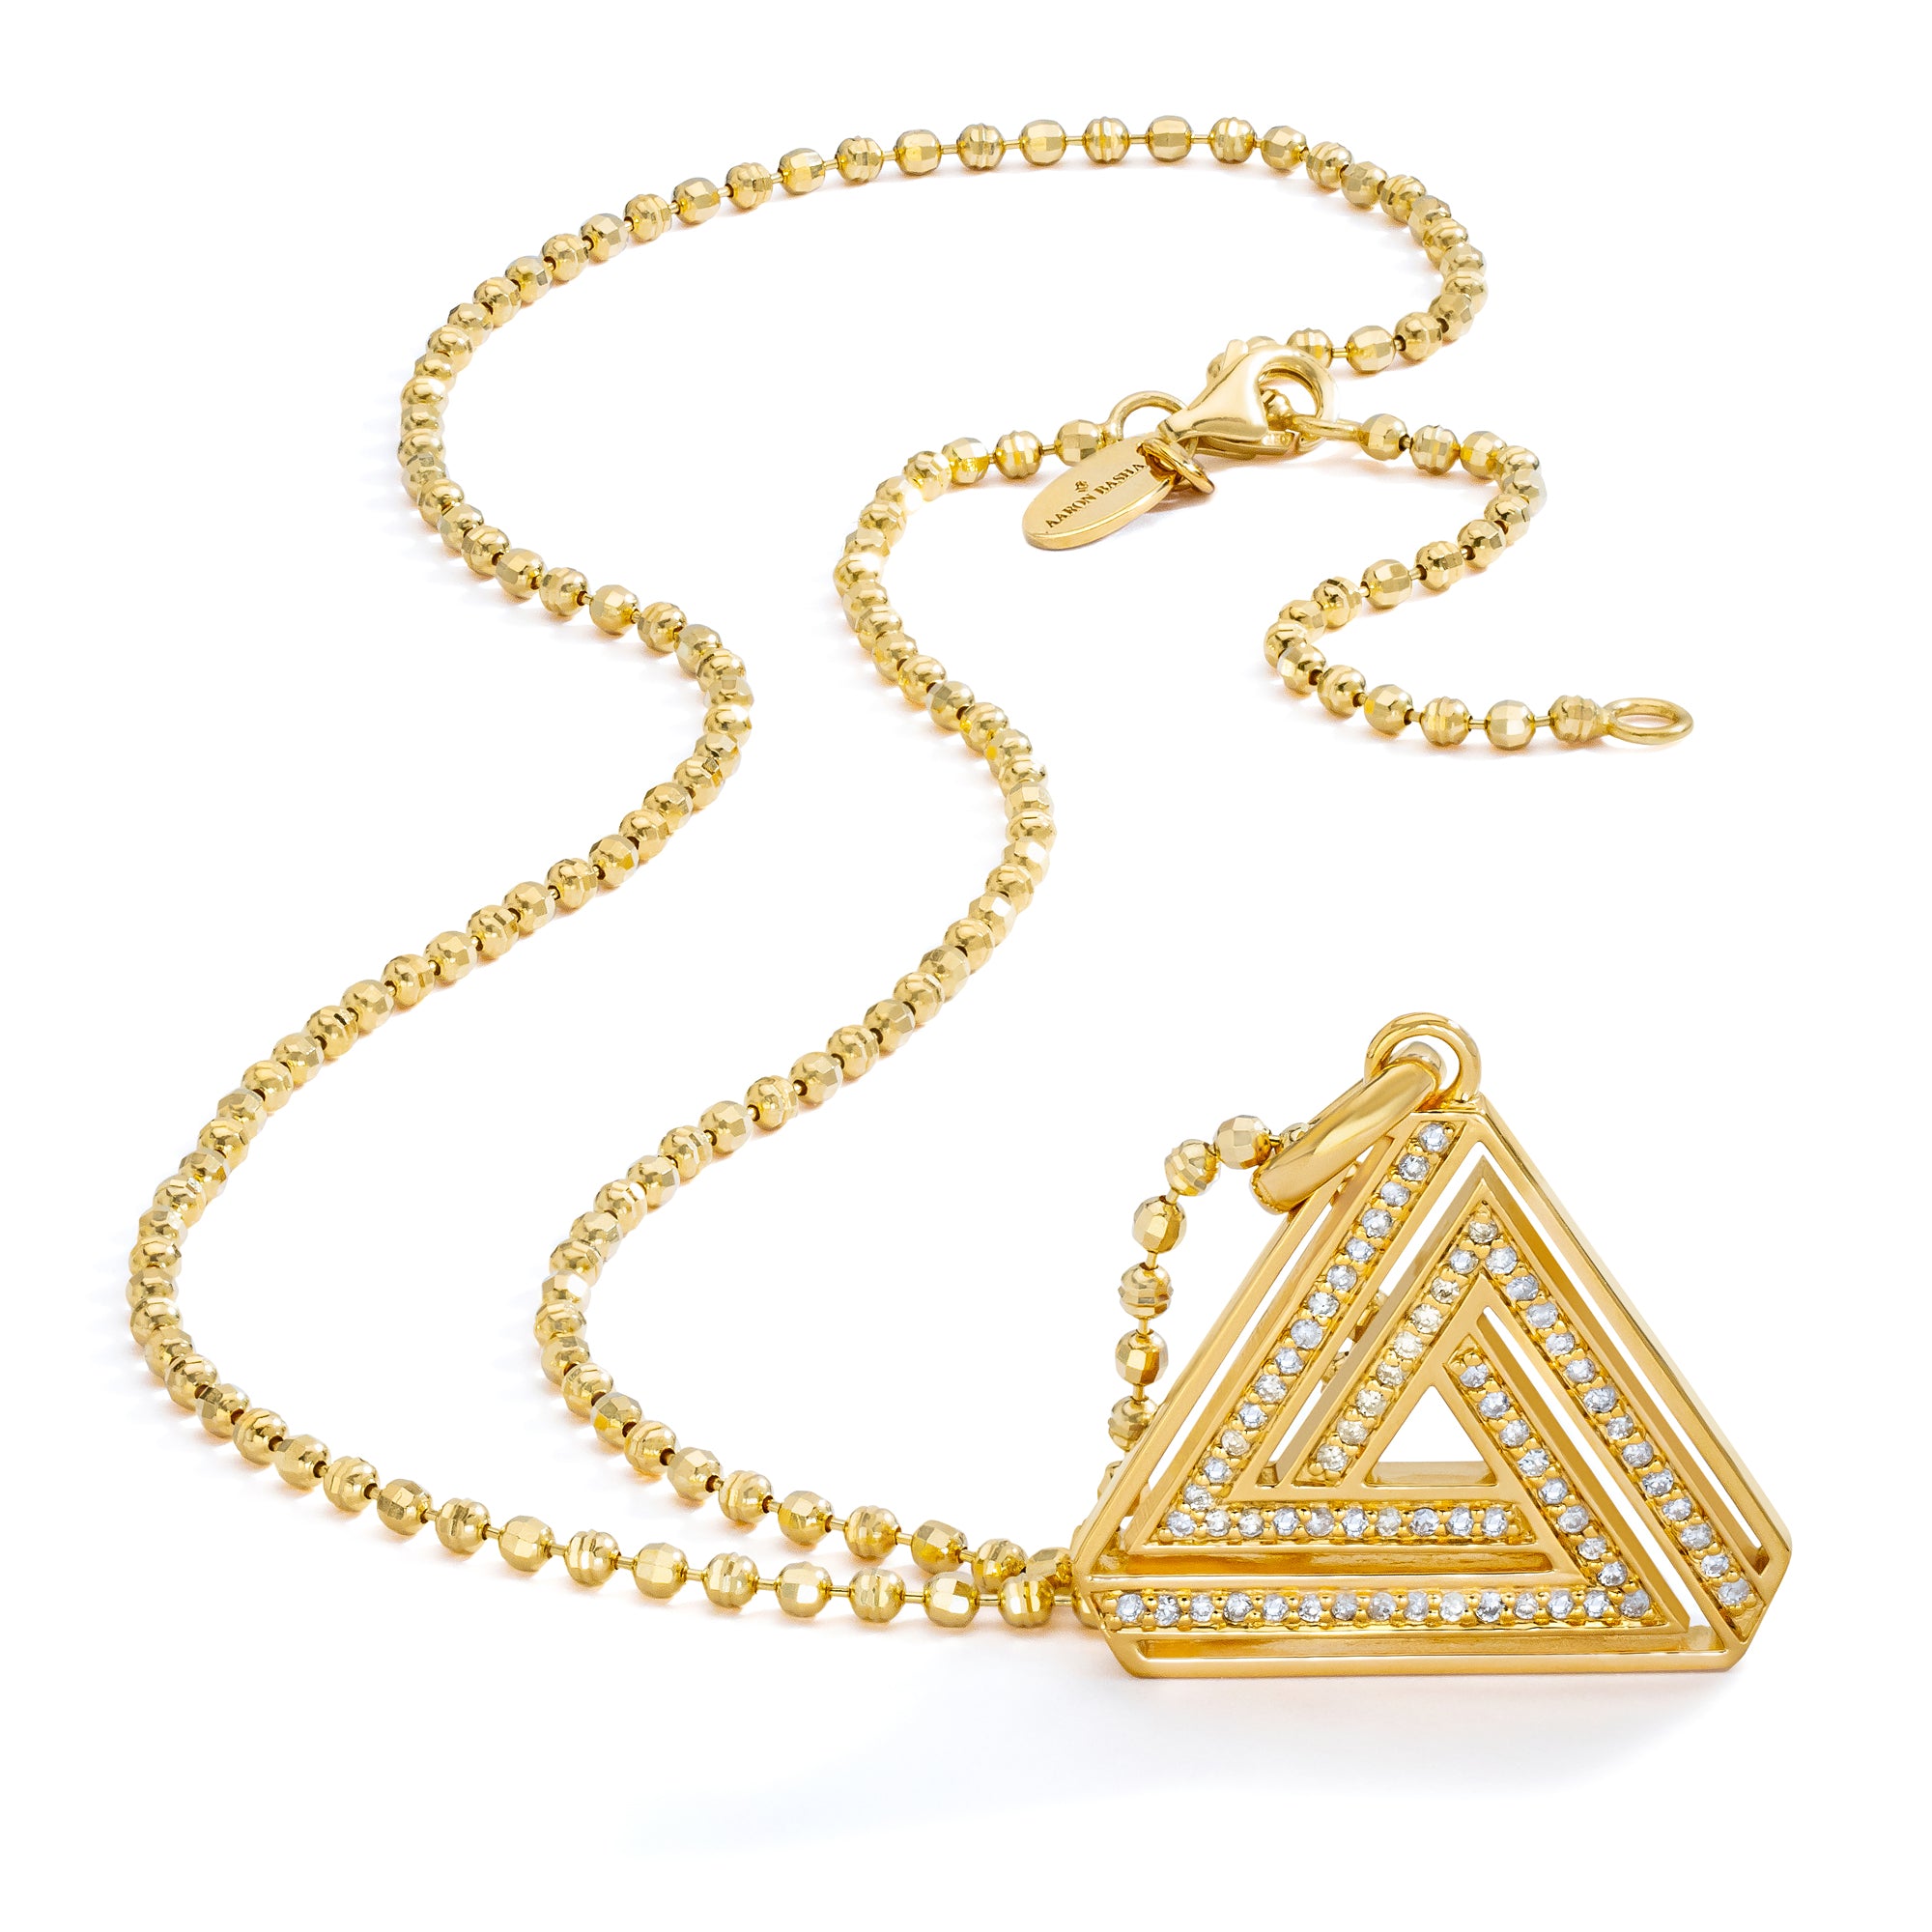 Small Abracadabra Triangle Series 4 - Delivery by May 20th